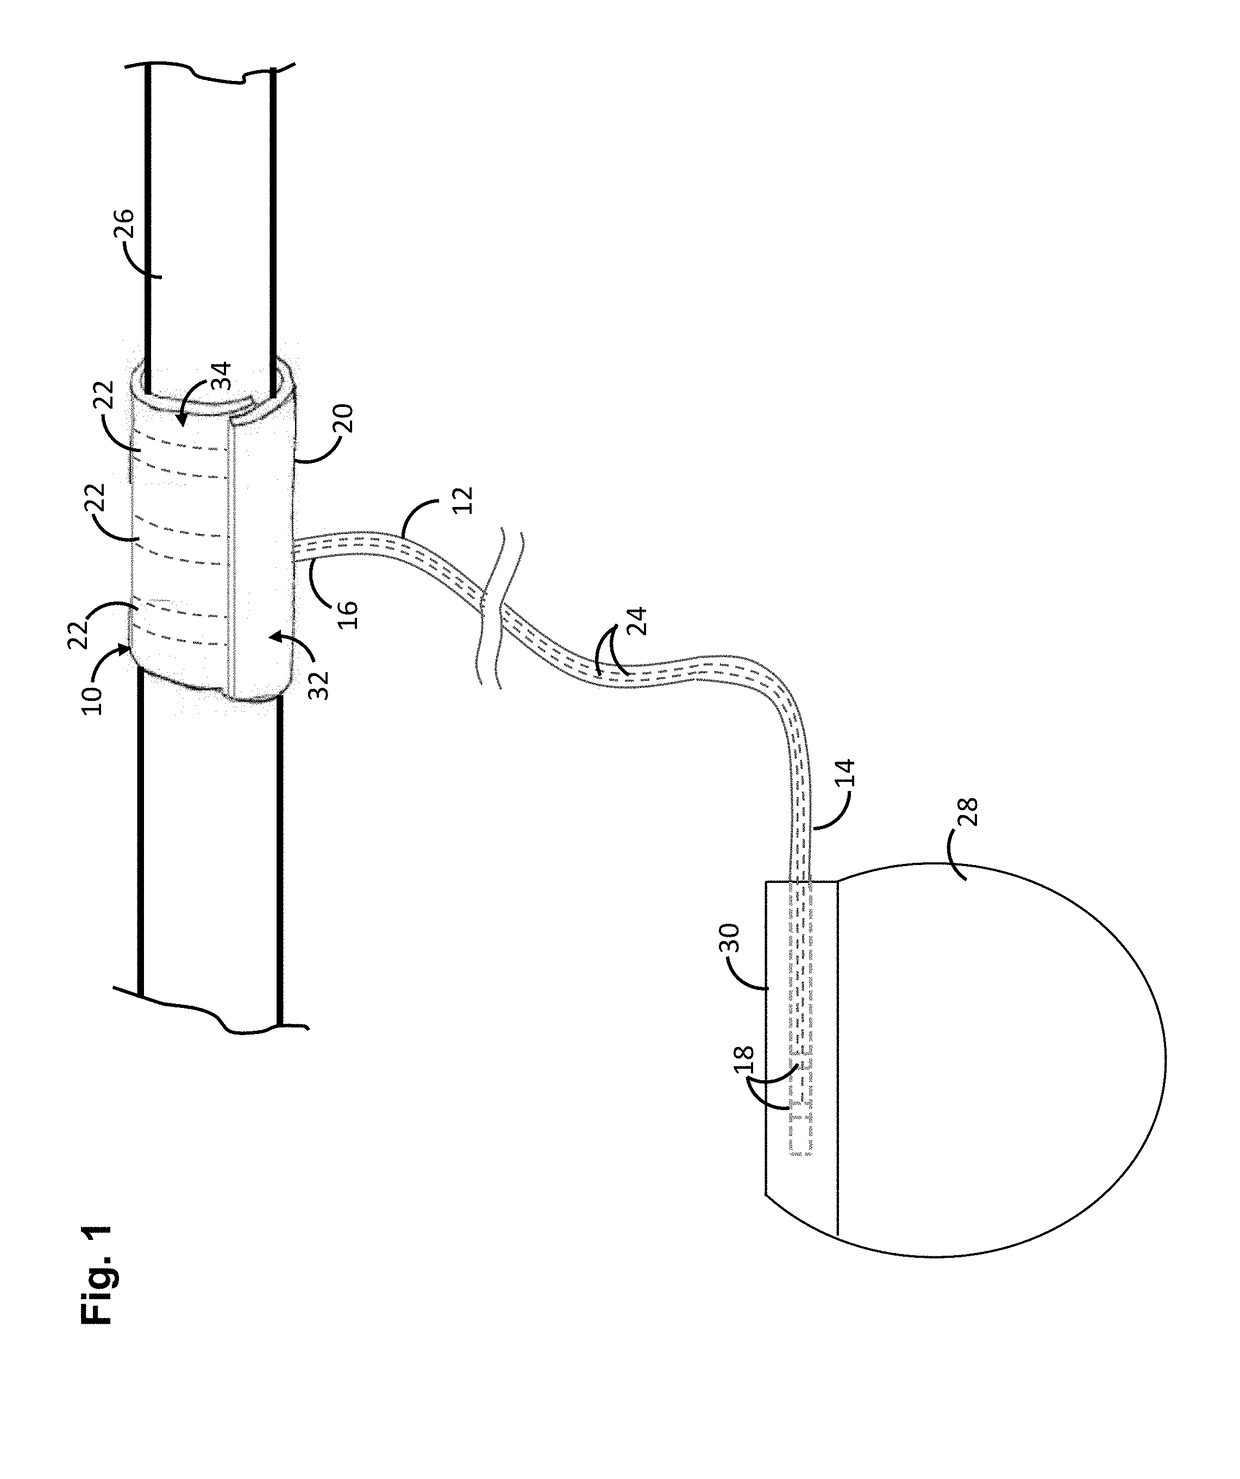 Self-expanding nerve cuff electrode